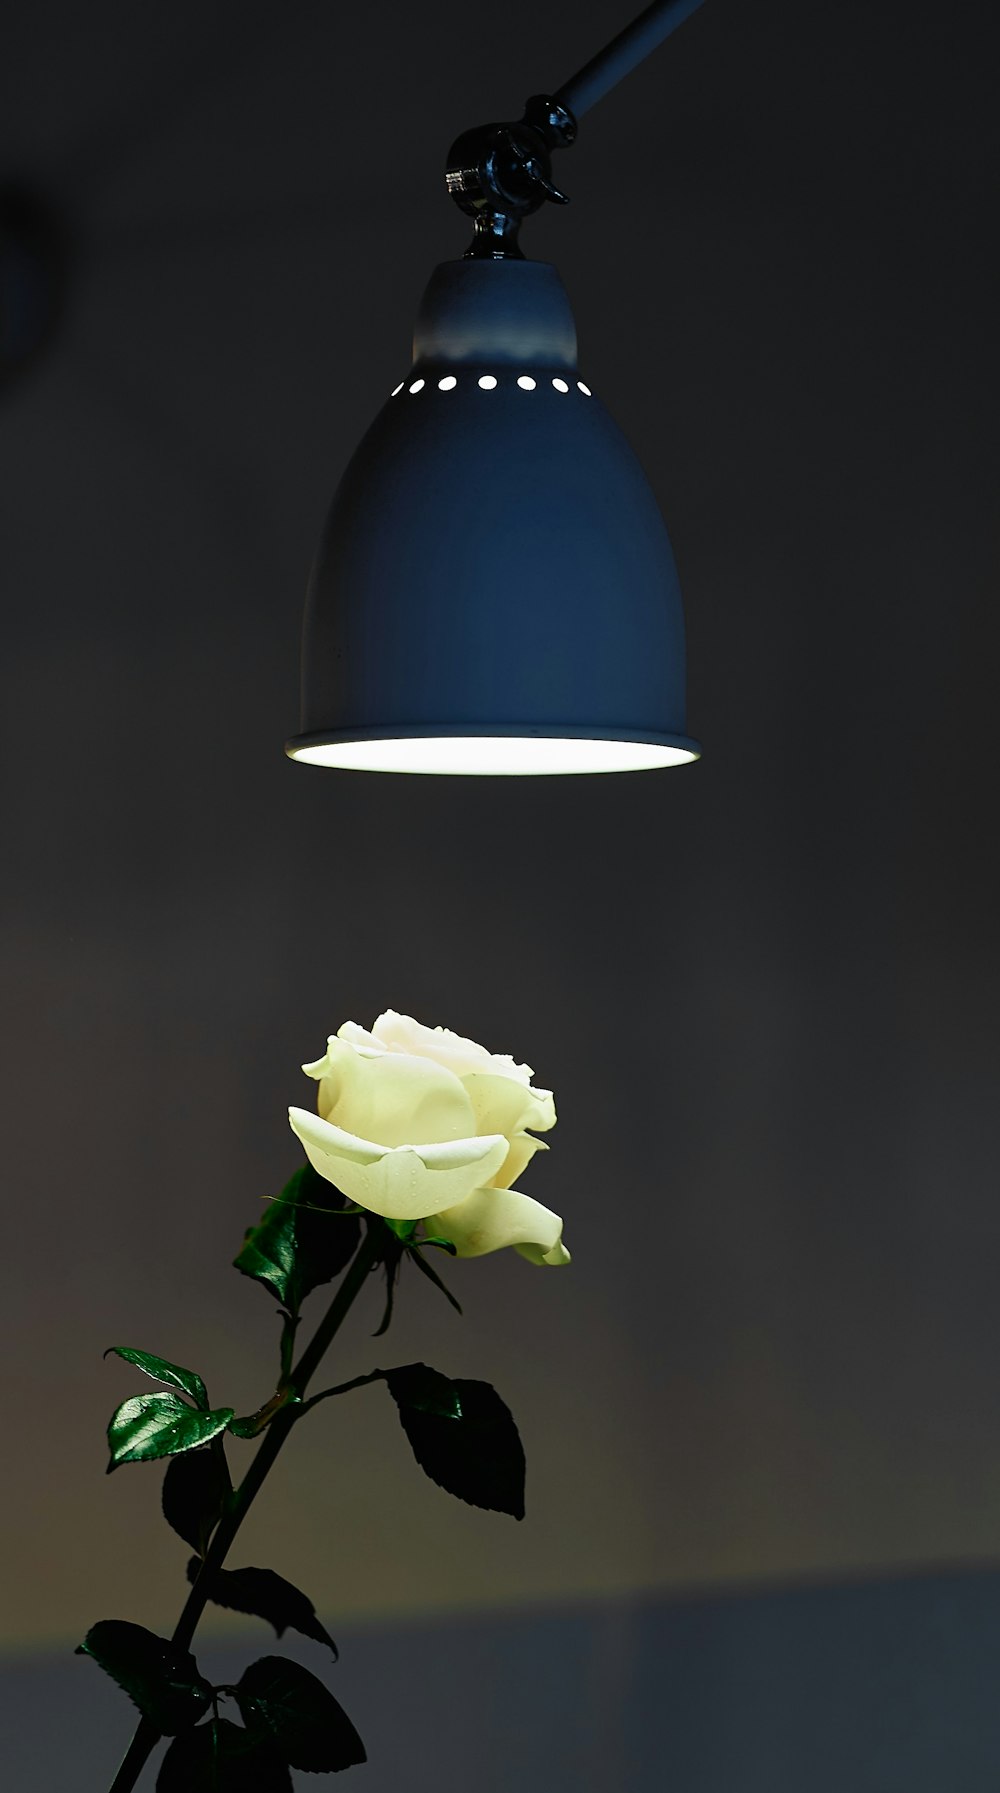 a single white rose in a vase under a light